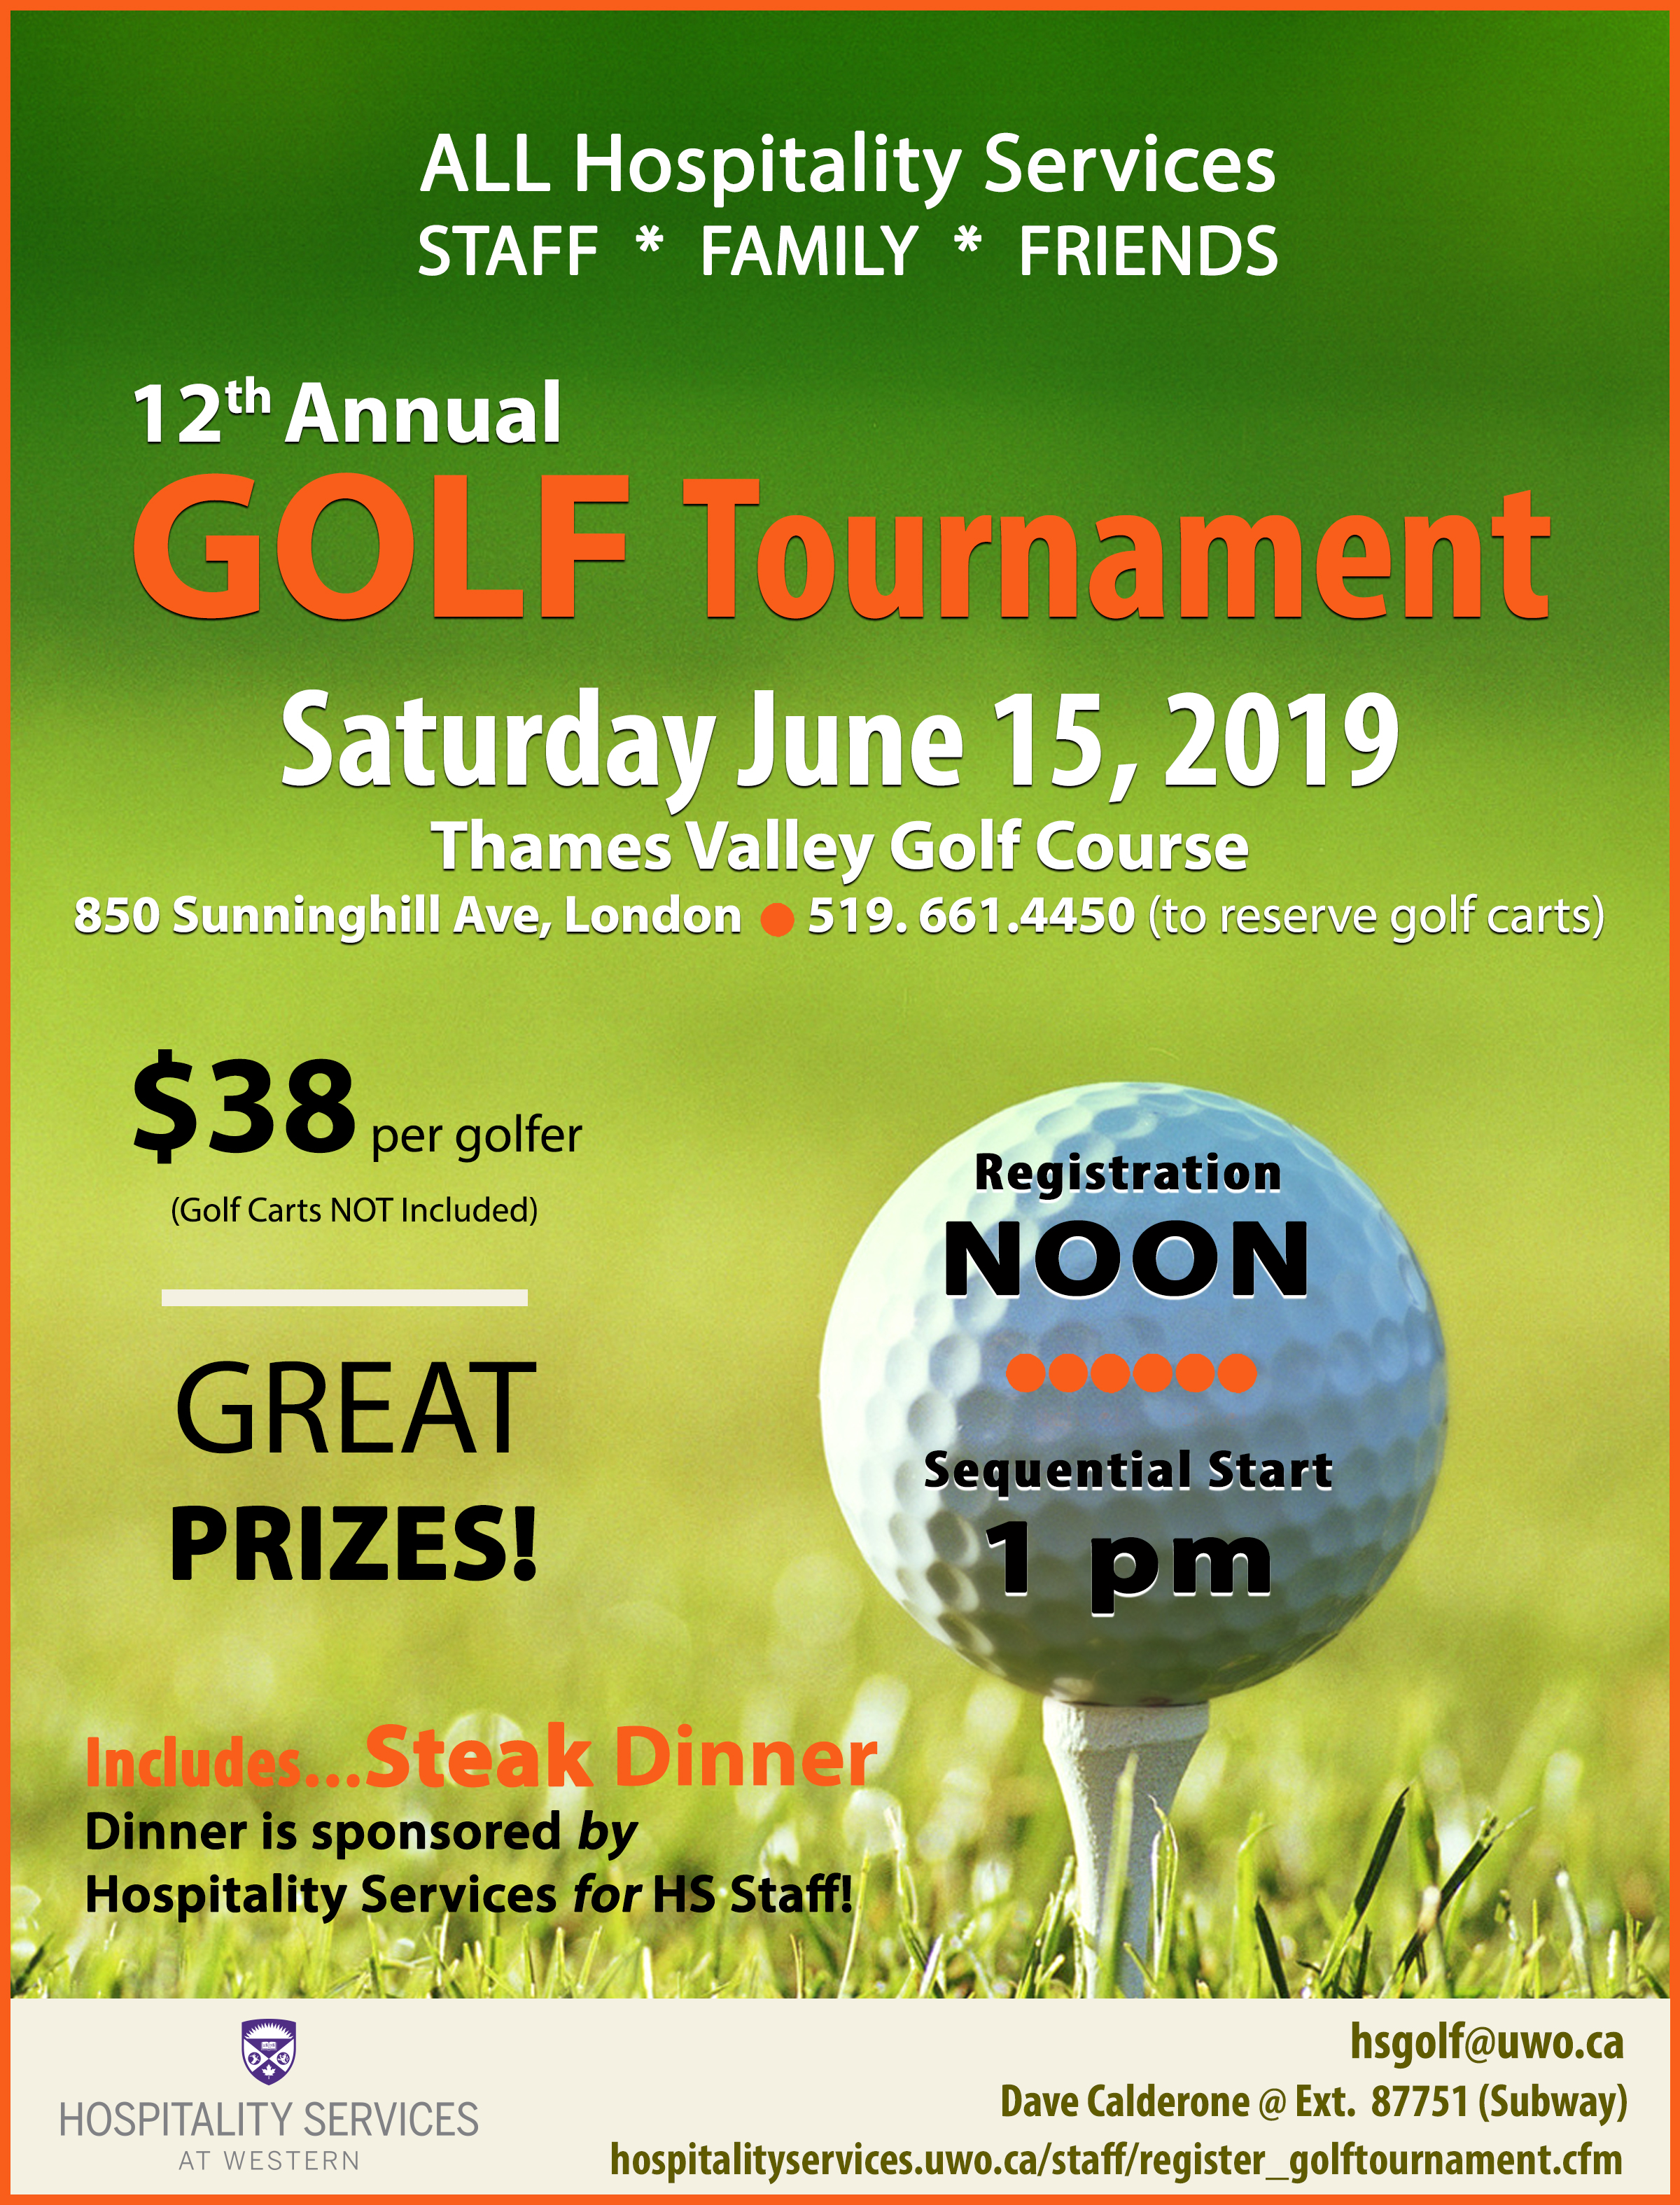 HS Annual Golf Tournament. Saturday, June 9th, 2017. Thames Valley Golf Course, 850 Sunninghill Ave. 519-661-4450. Price includes: 18 holes and steak dinner. $37 per golfer. Prizes: Great prizes for longest drive and closest to the pin. Sign-in at noon, sequential start at 1pm. To register, email hsgolf@uwo.ca, or call Dave. 519-878-5990